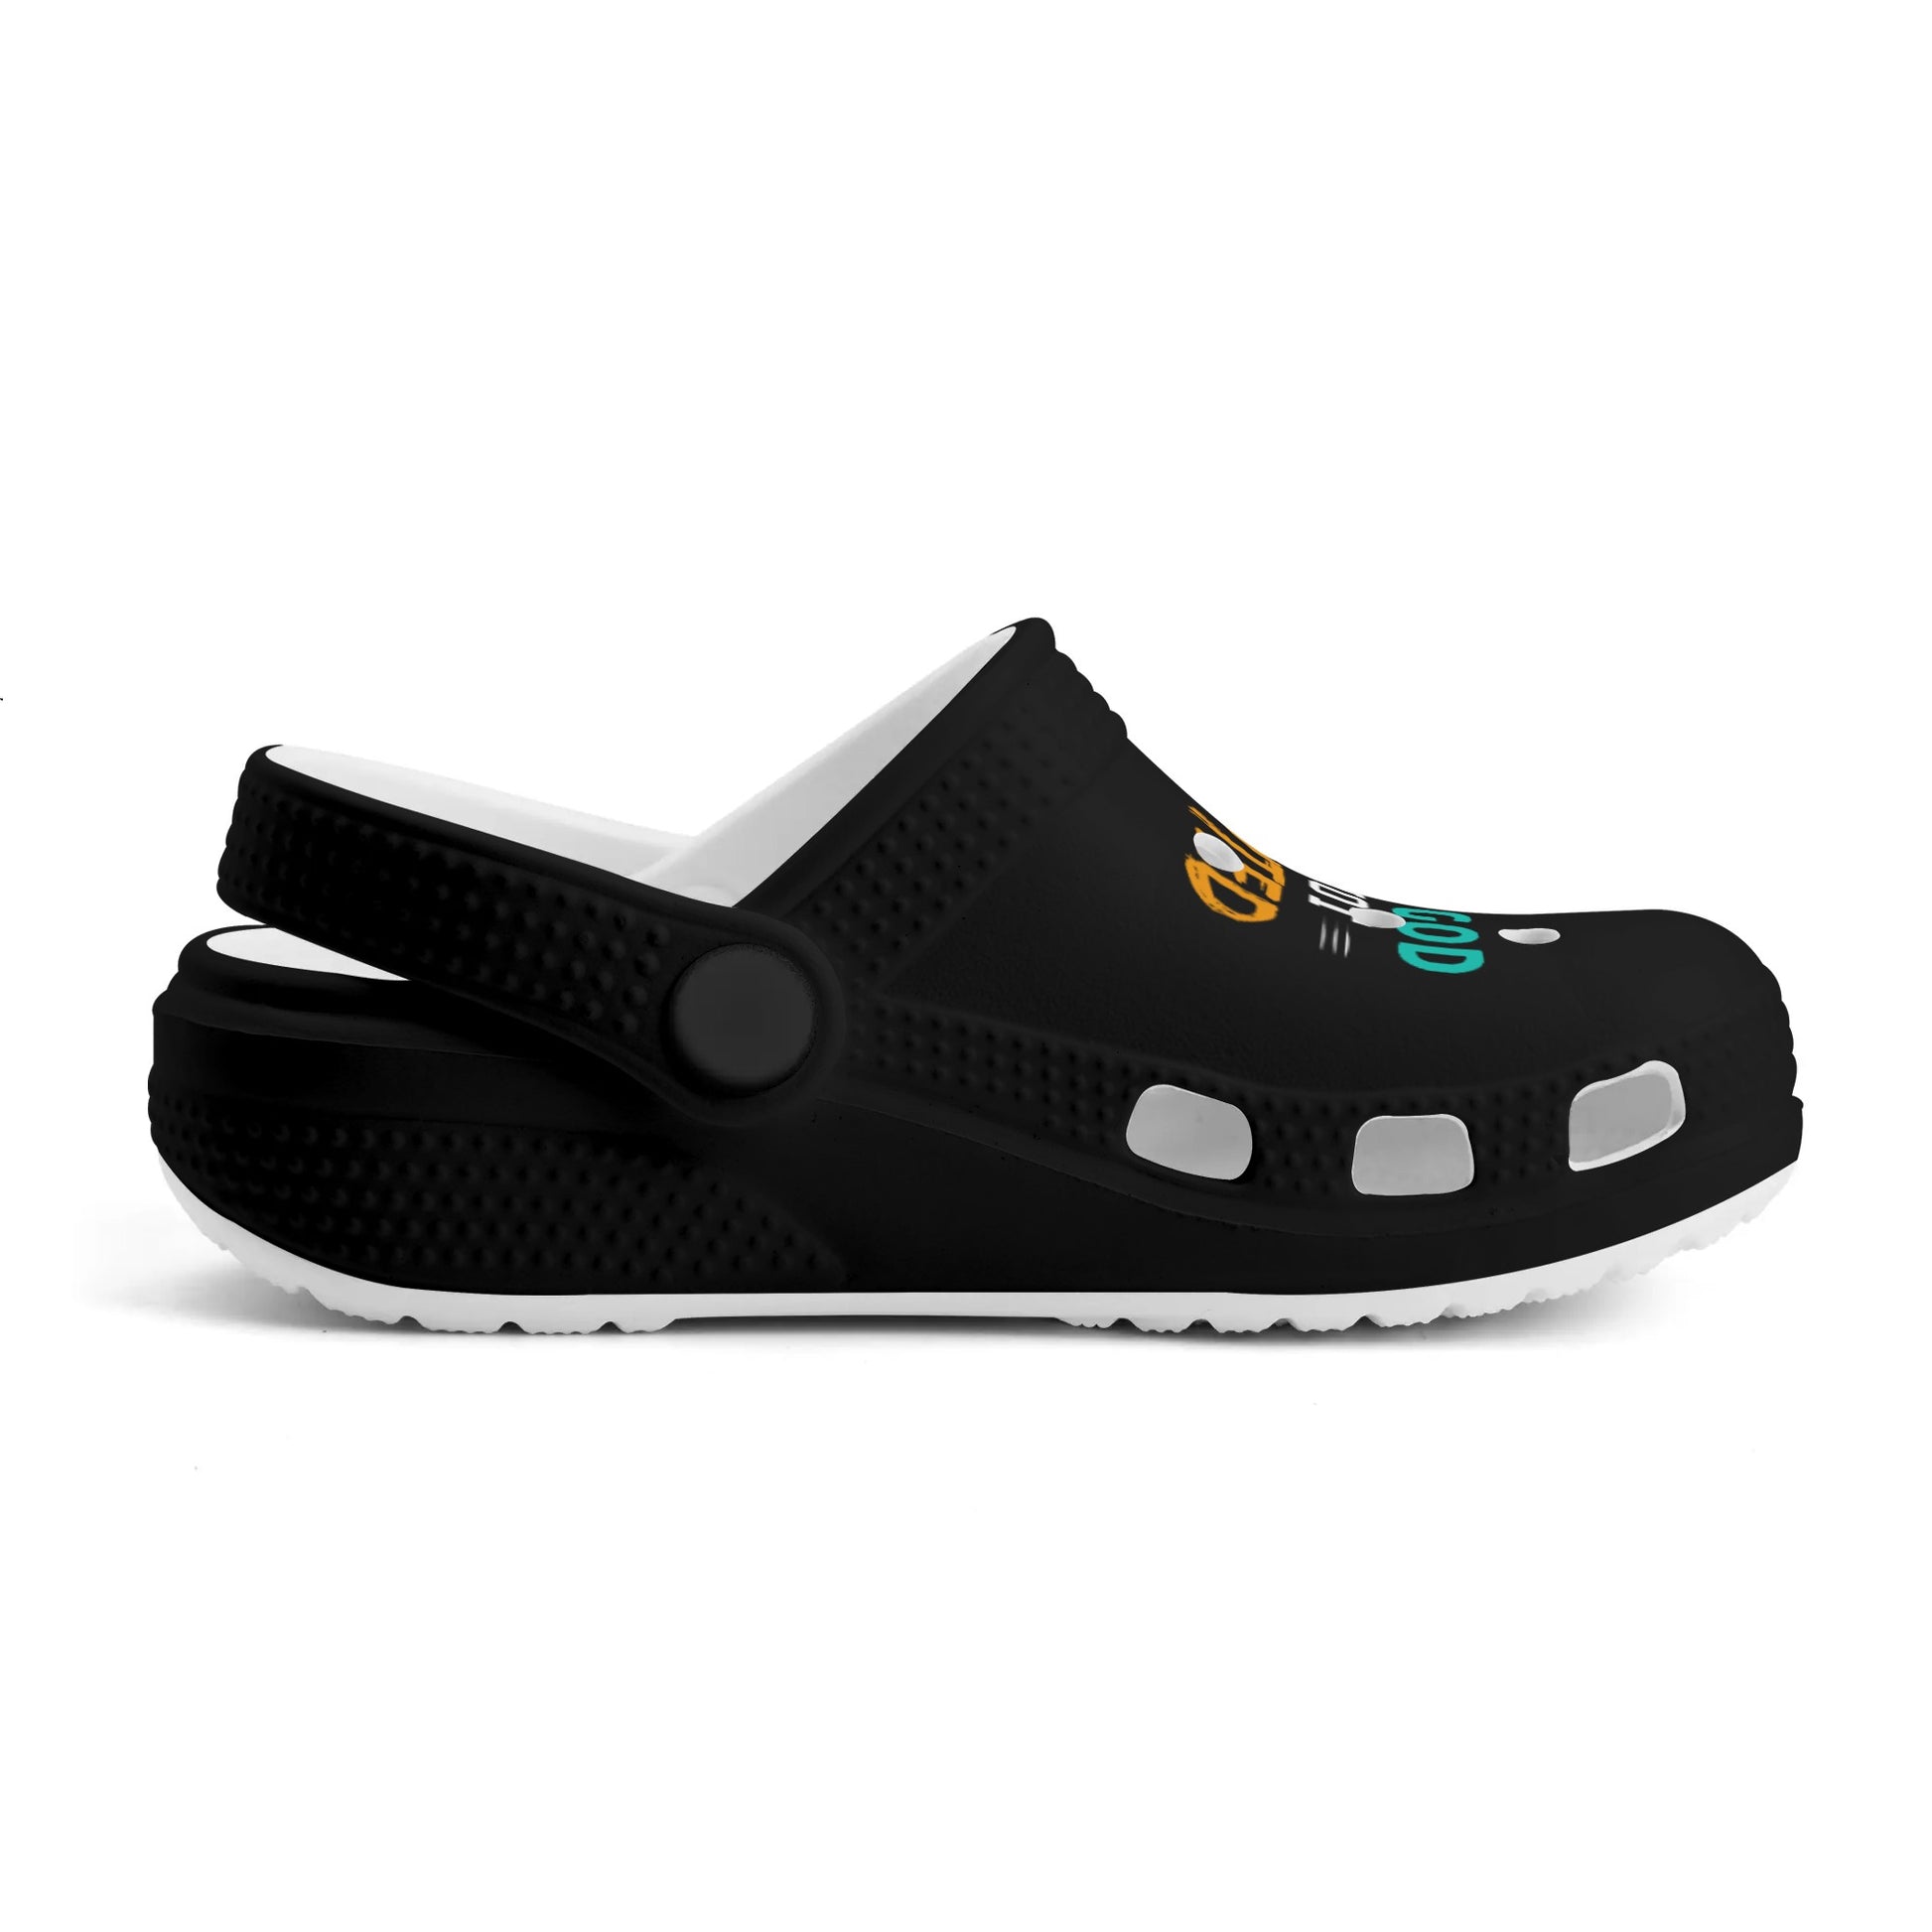 Child Of God Touch Not His Anointed Kids Classic Christian Crocs popcustoms